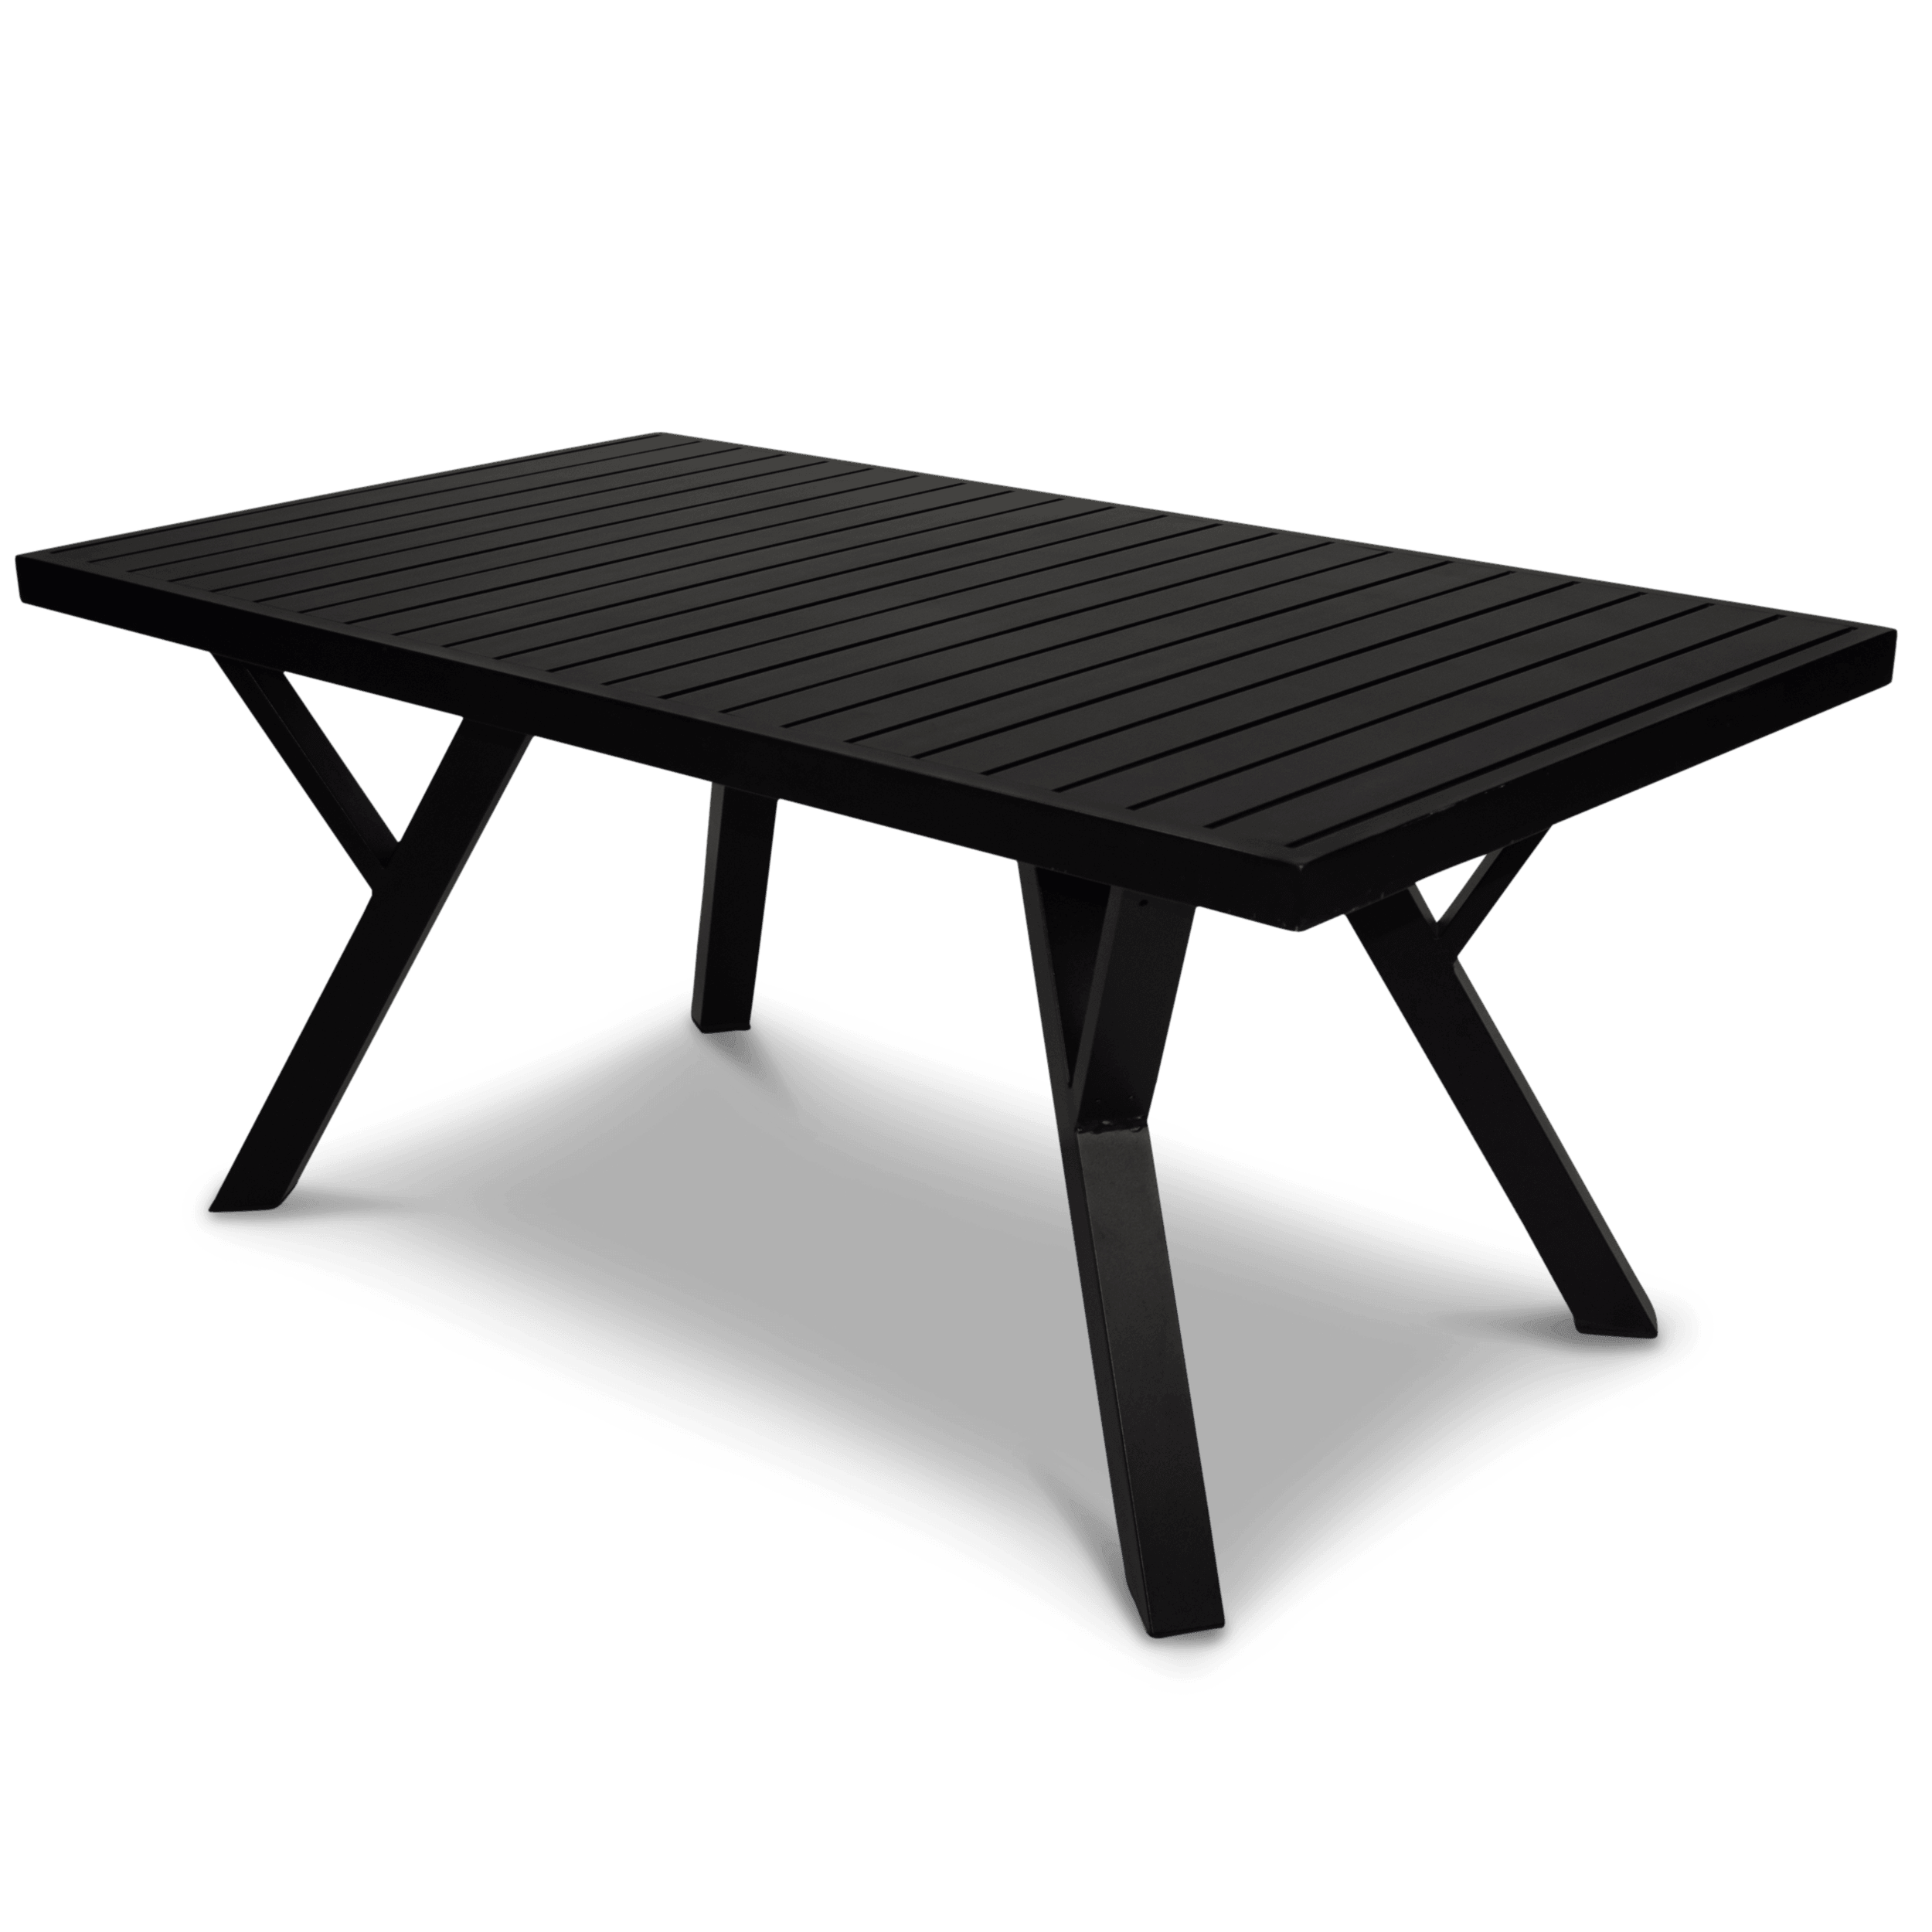 Morocco Coffee Table in Black - The Furniture Shack